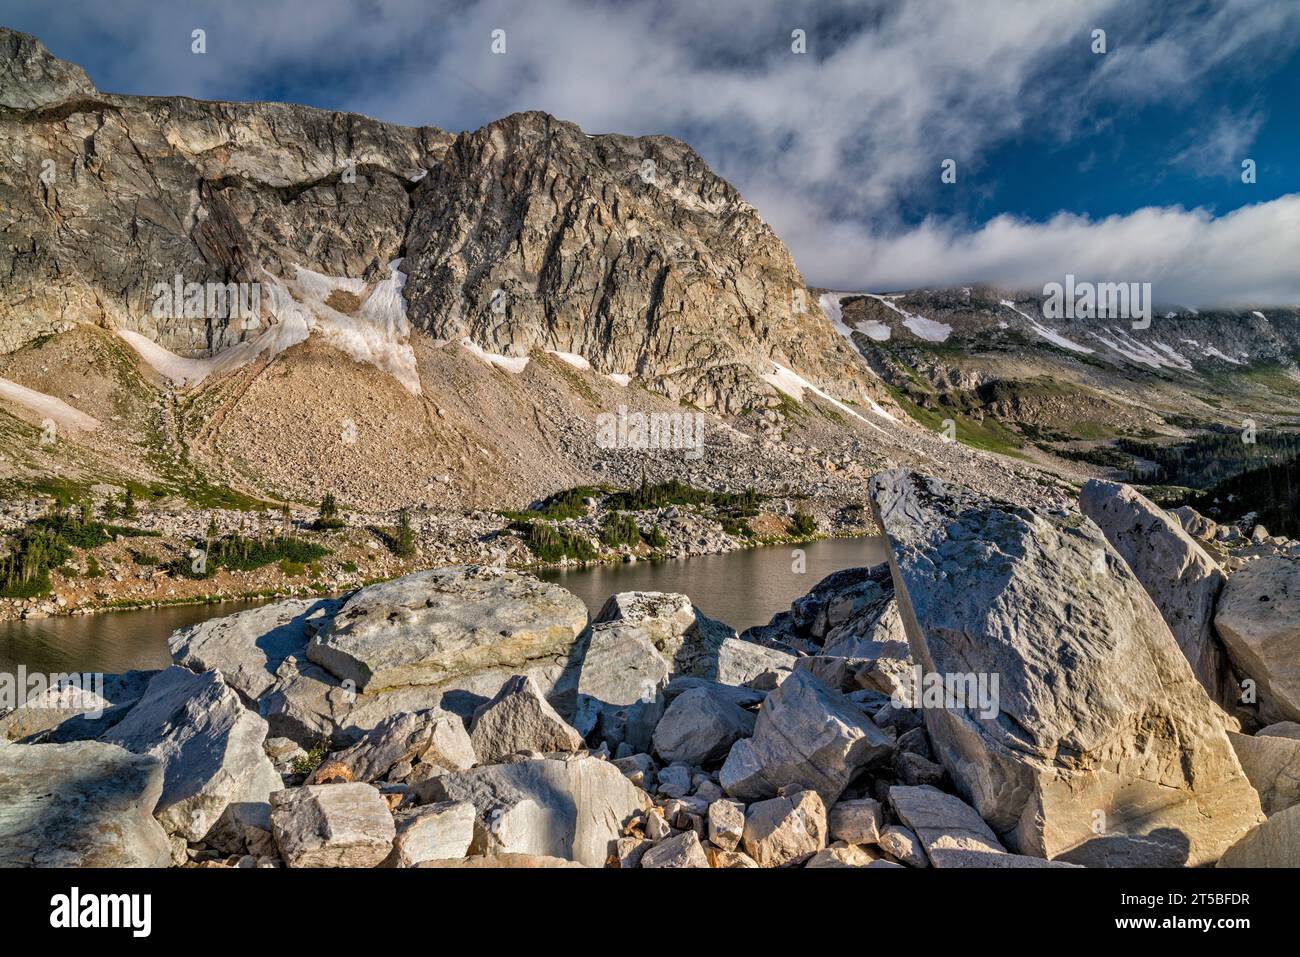 Snowy Range, Lookout Lake, Blick vom Lakes Trail, Hochsommermorgen, Medicine Bow Mountains, Rocky Mountains, Medicine Bow Nat Forest, Wyoming, USA Stockfoto